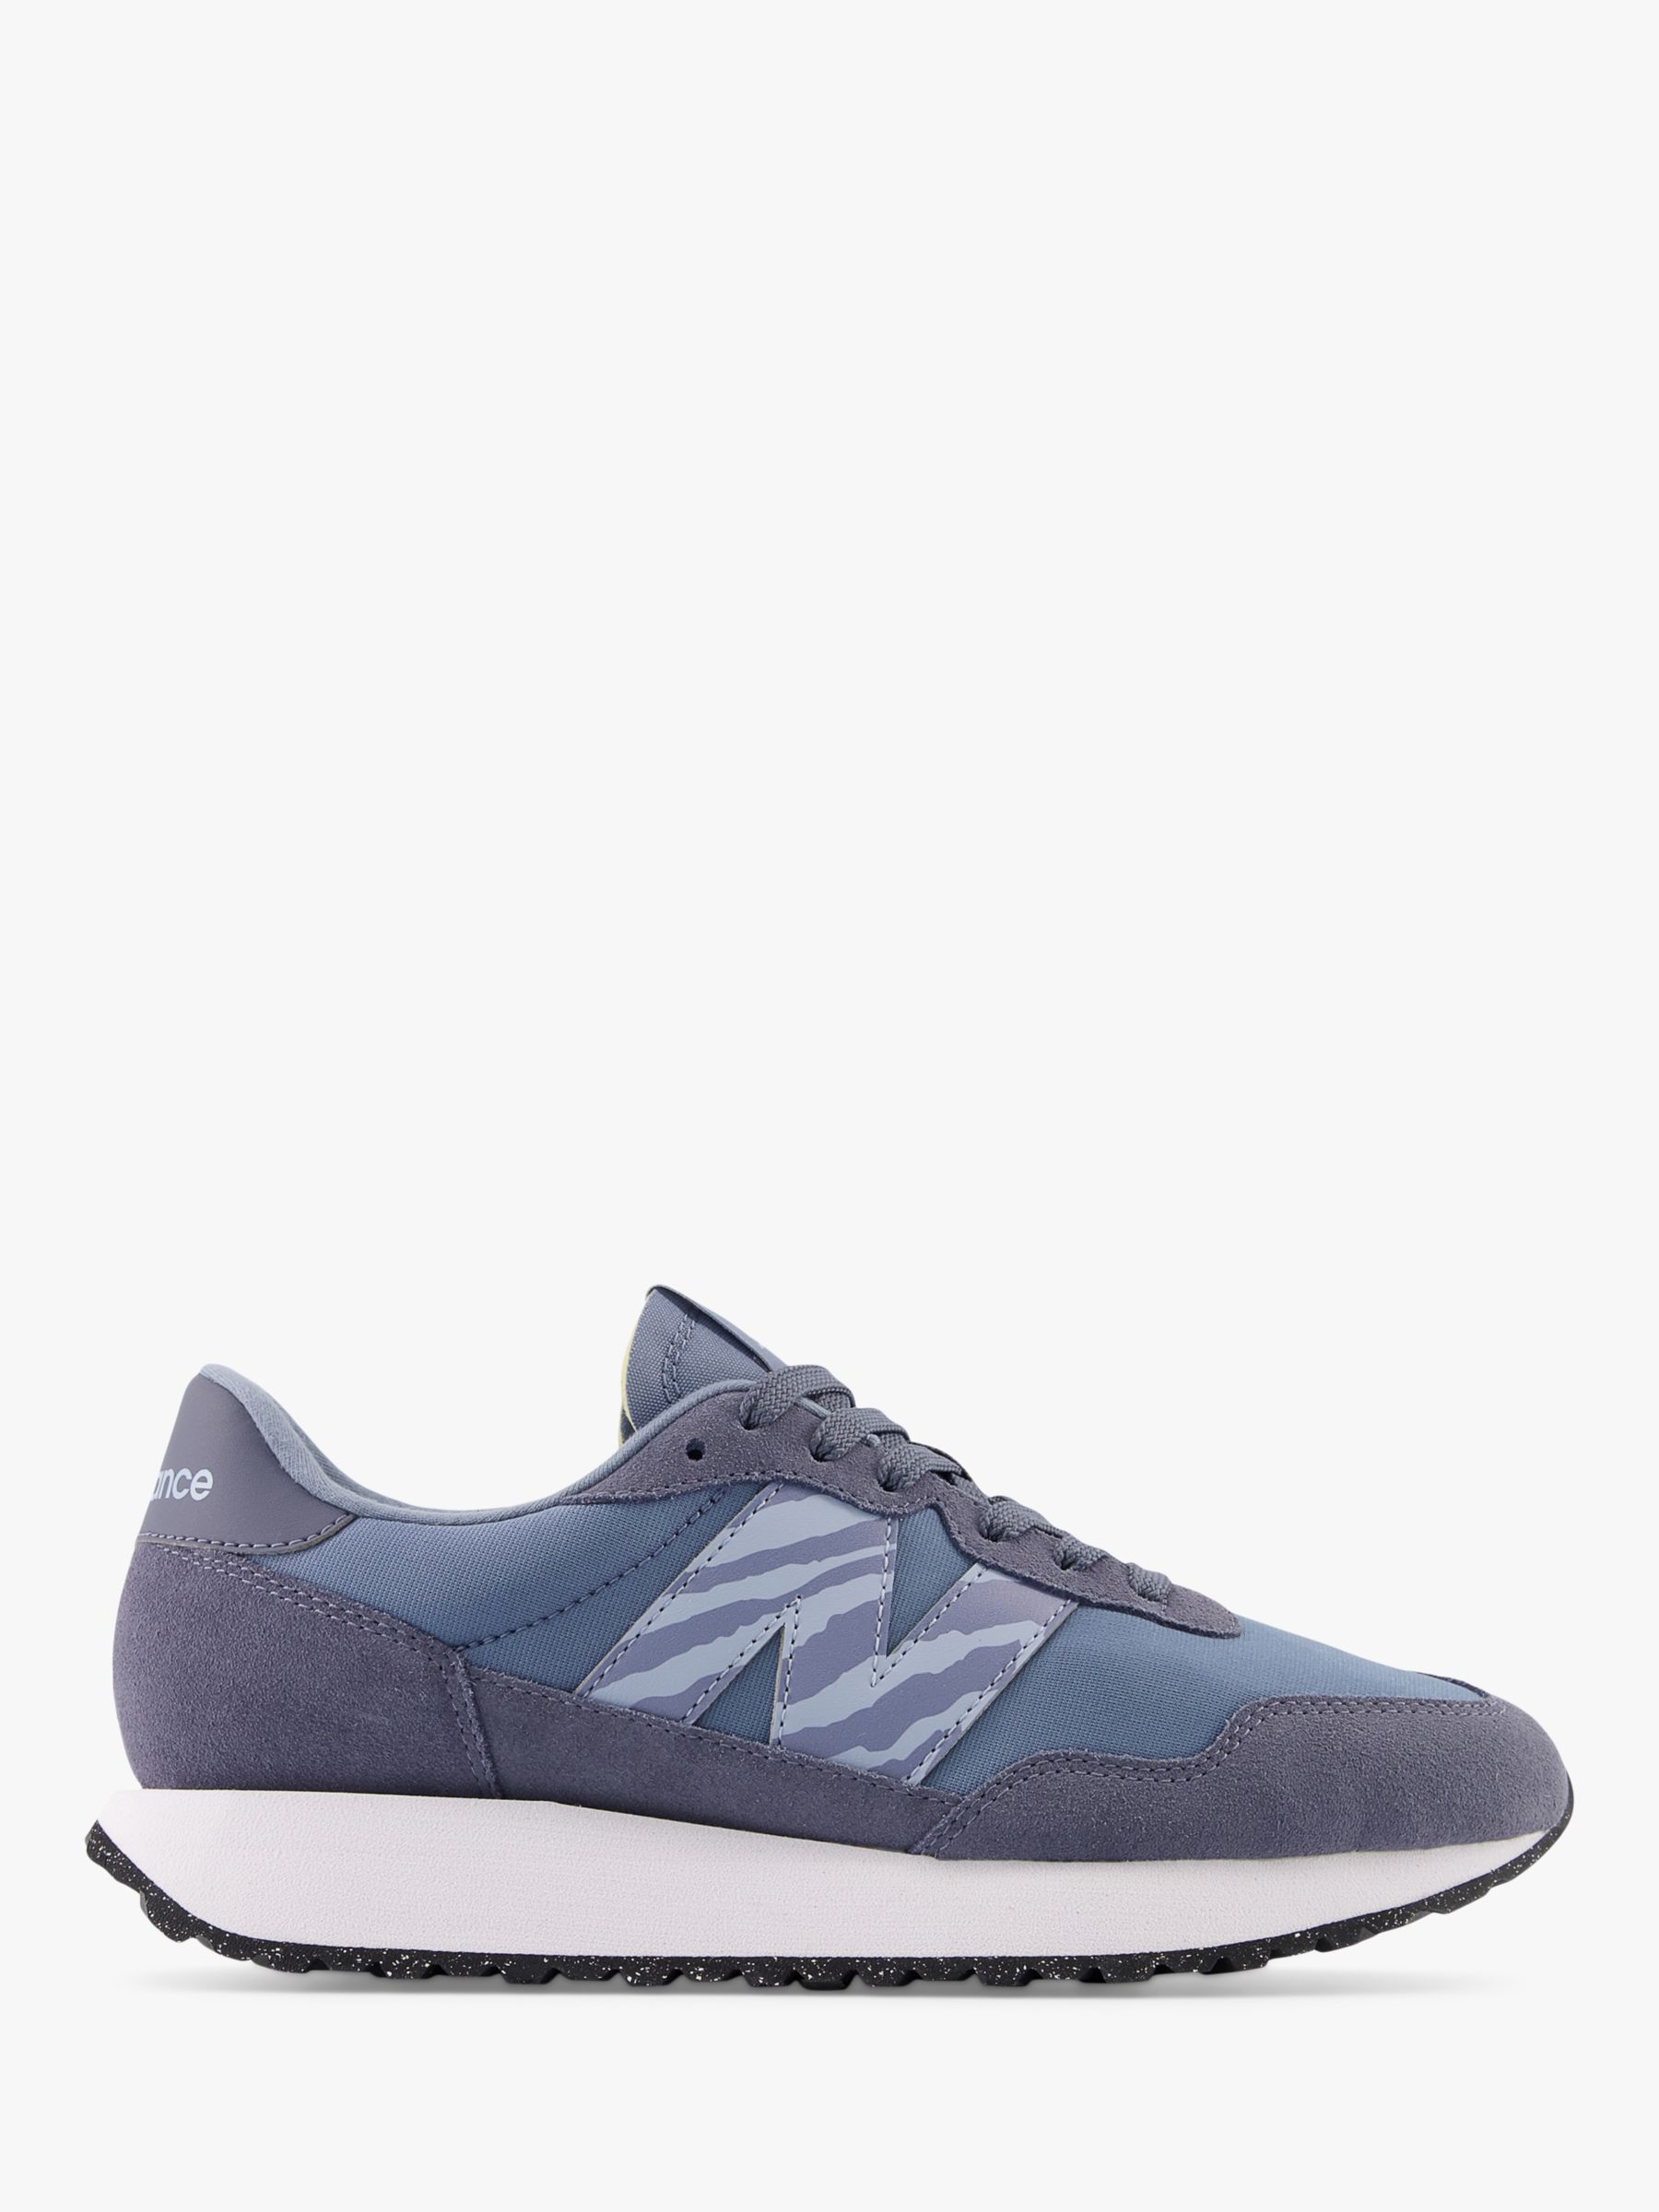 New Balance 237 Suede Mesh Trainers, Arctic Grey at John Lewis & Partners